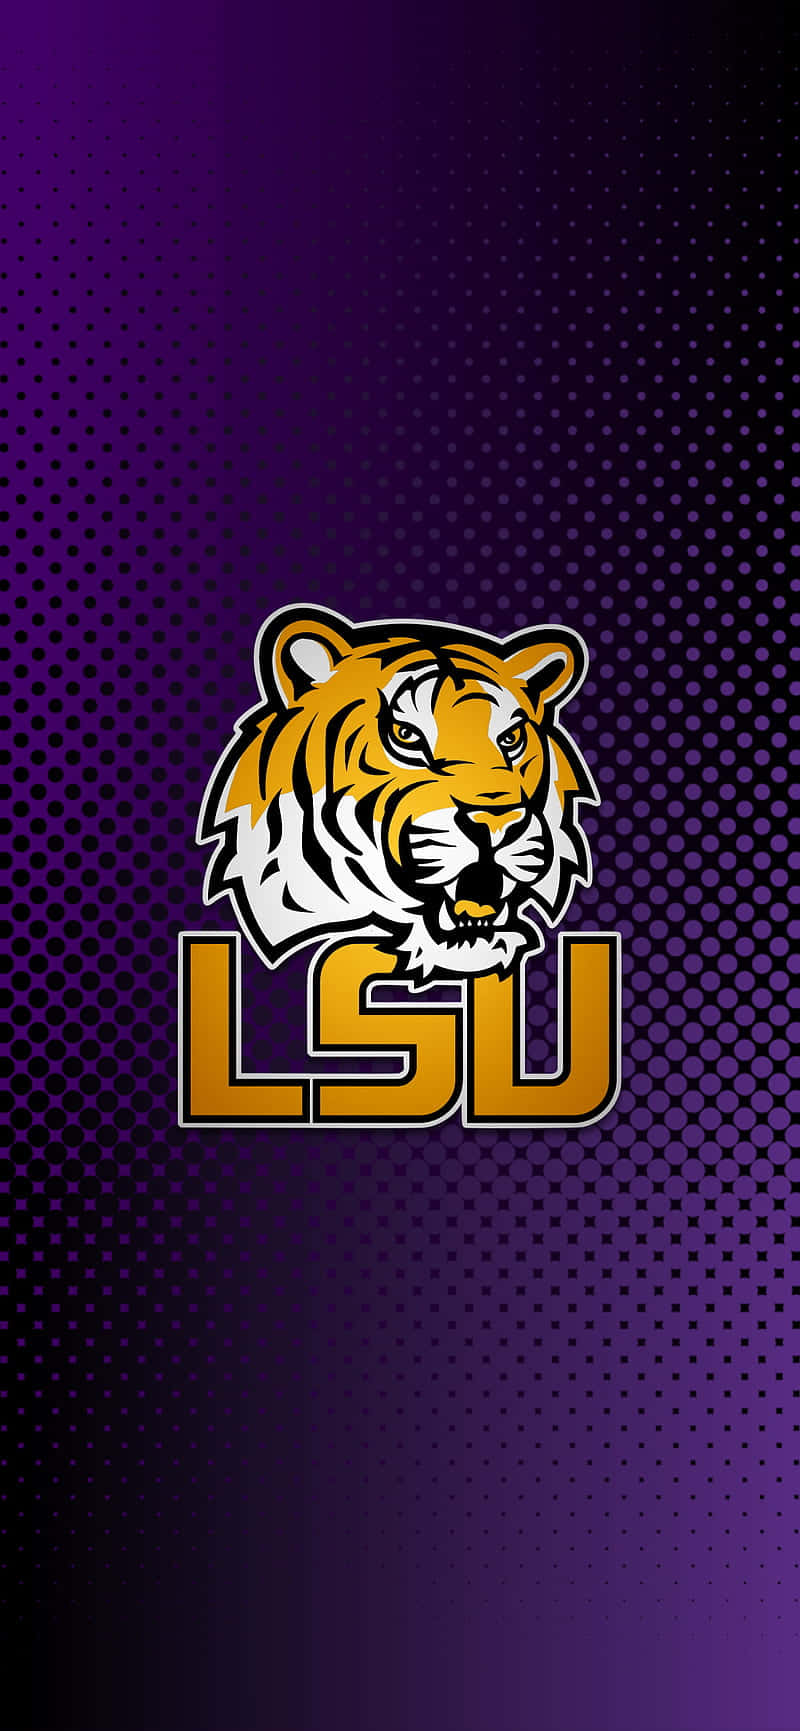 Get the latest LSU sports news on your iPhone! Wallpaper